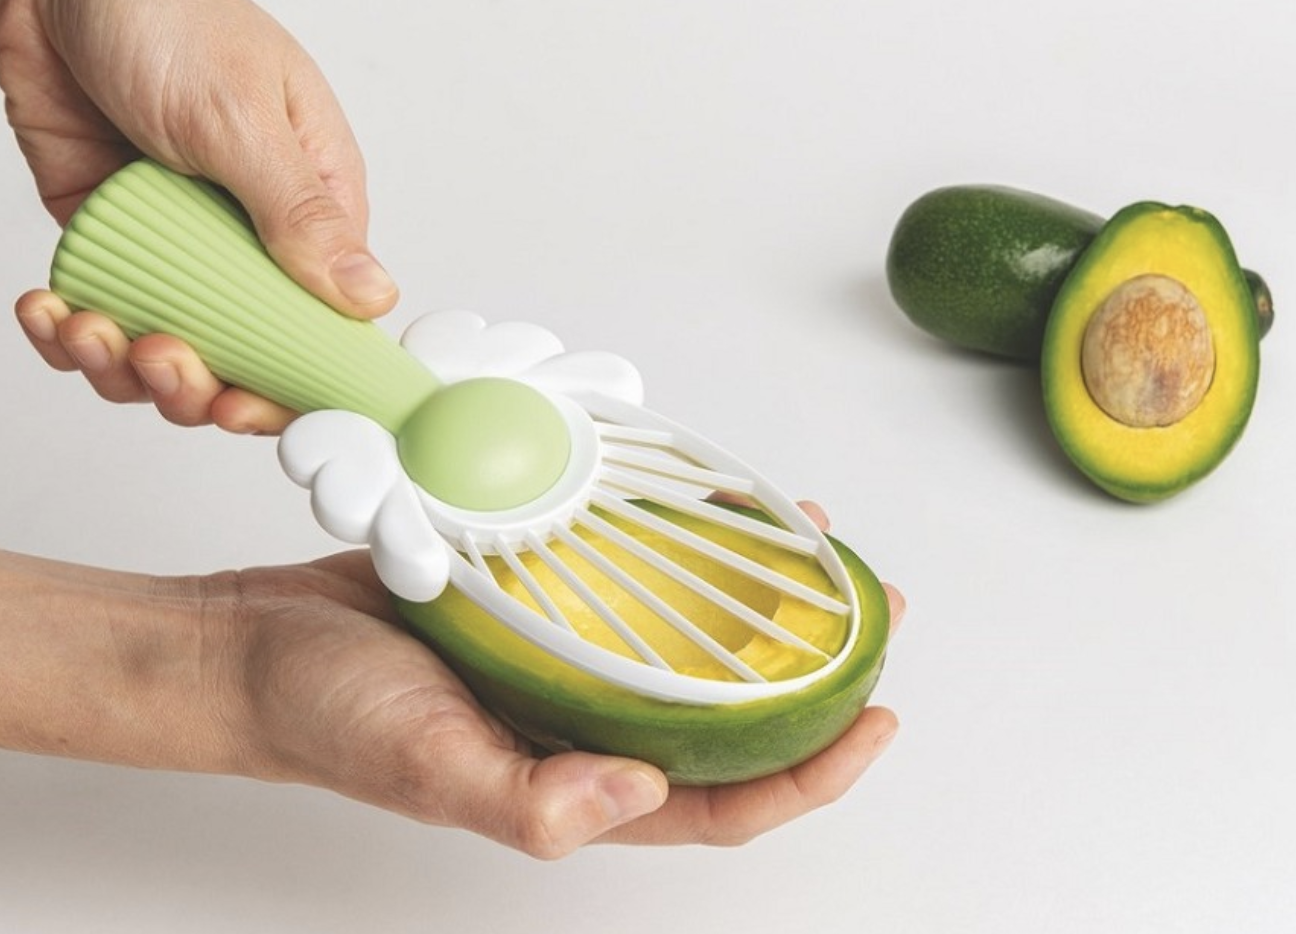 Slice and dice with this mandoline - CNET